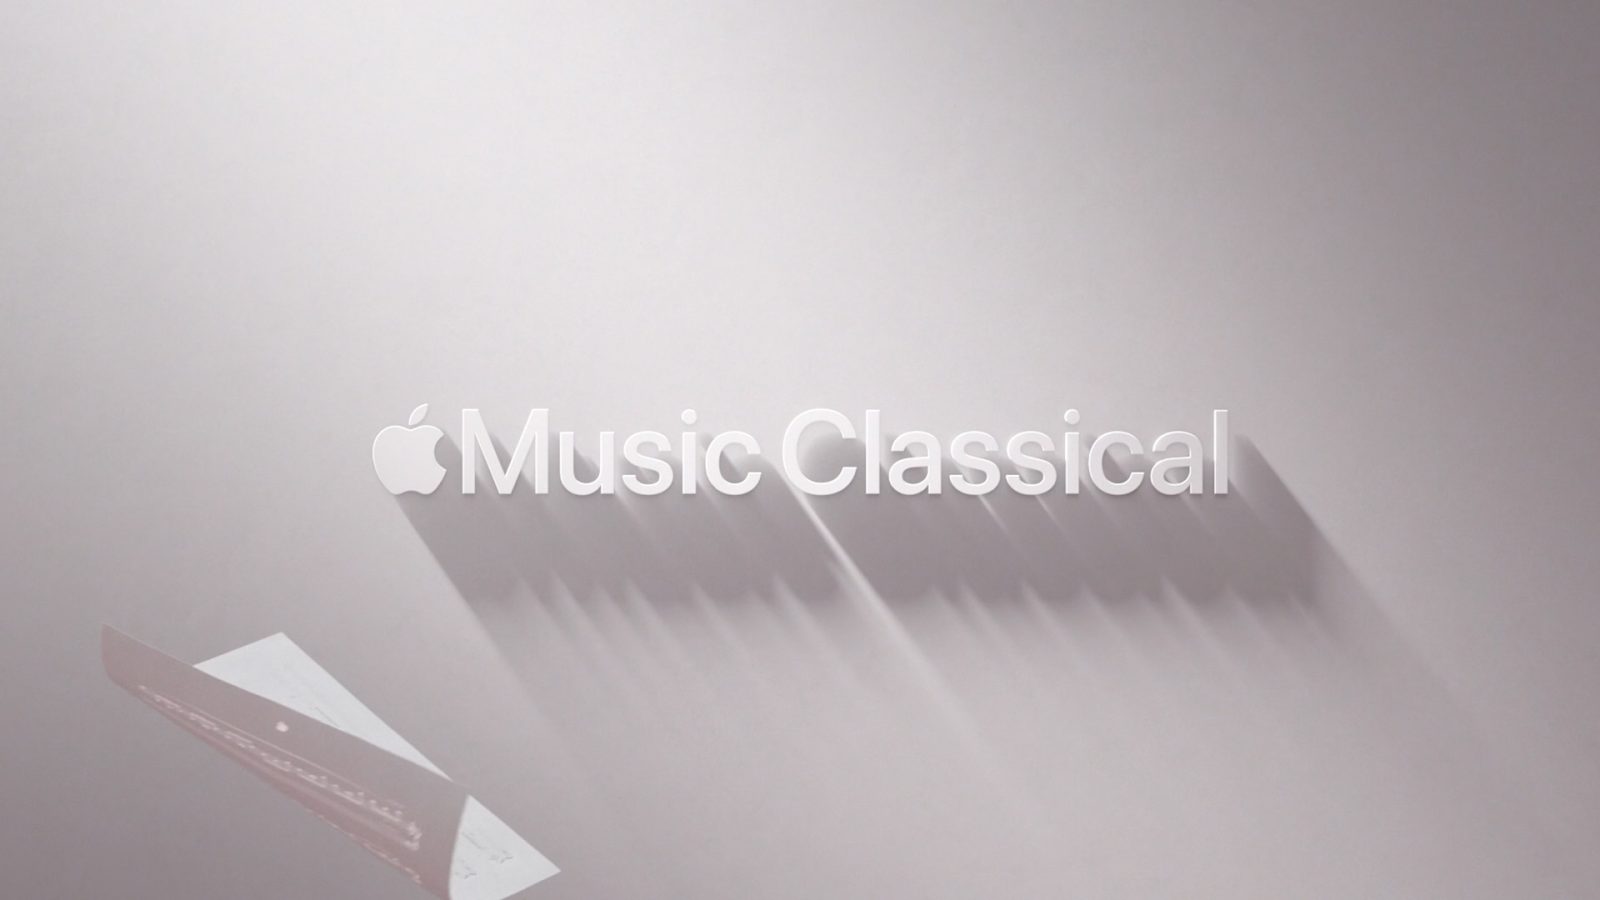 Apple Classical has what Apple Music needs: an app that doesn't come with iOS